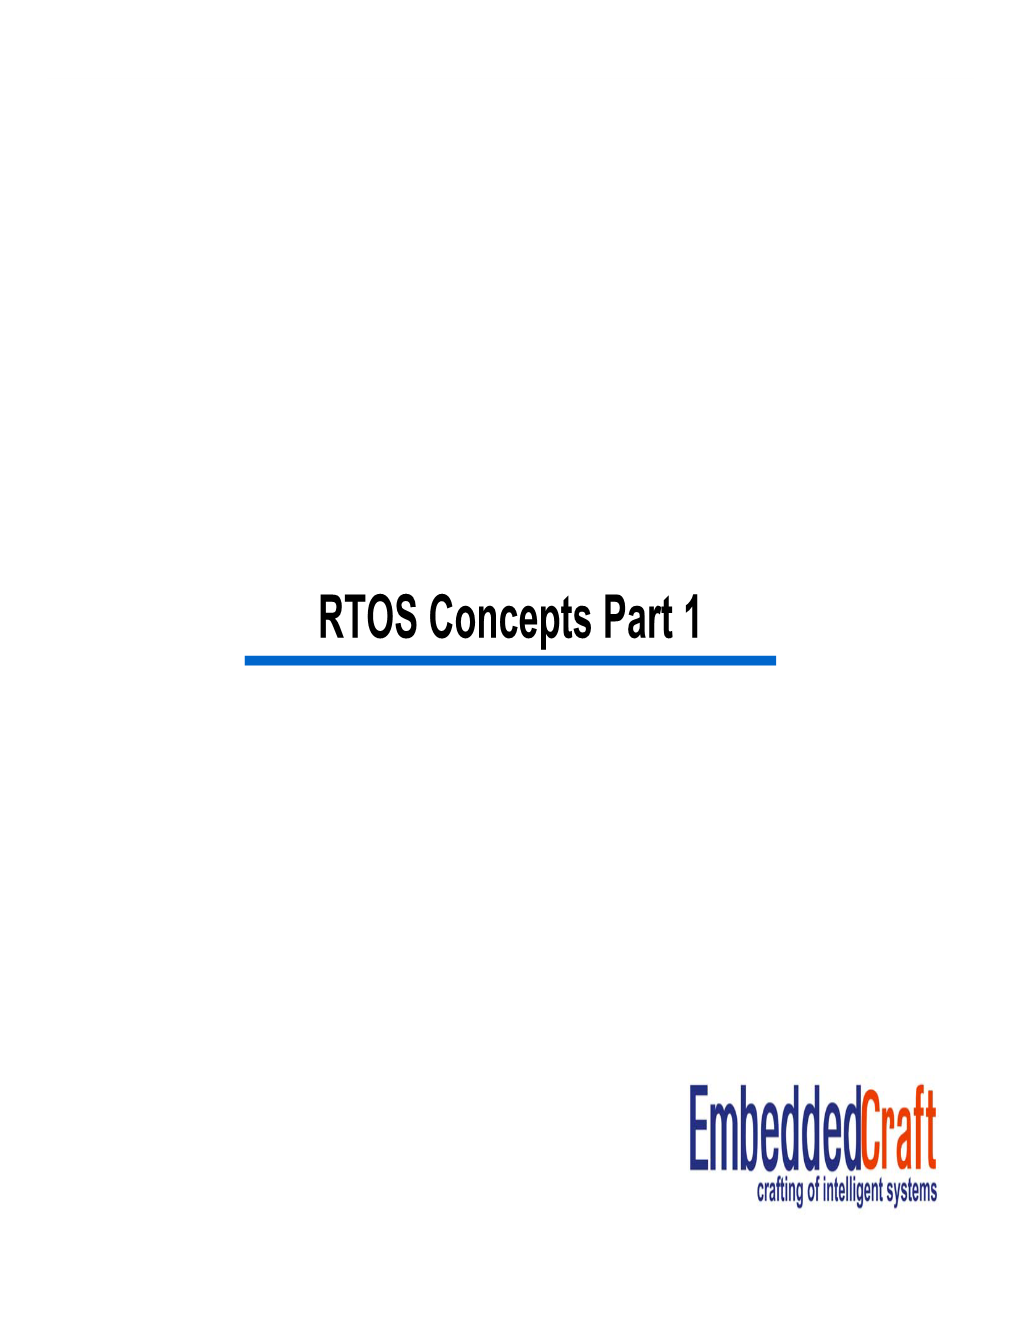 RTOS Concepts Part 1 Operating System